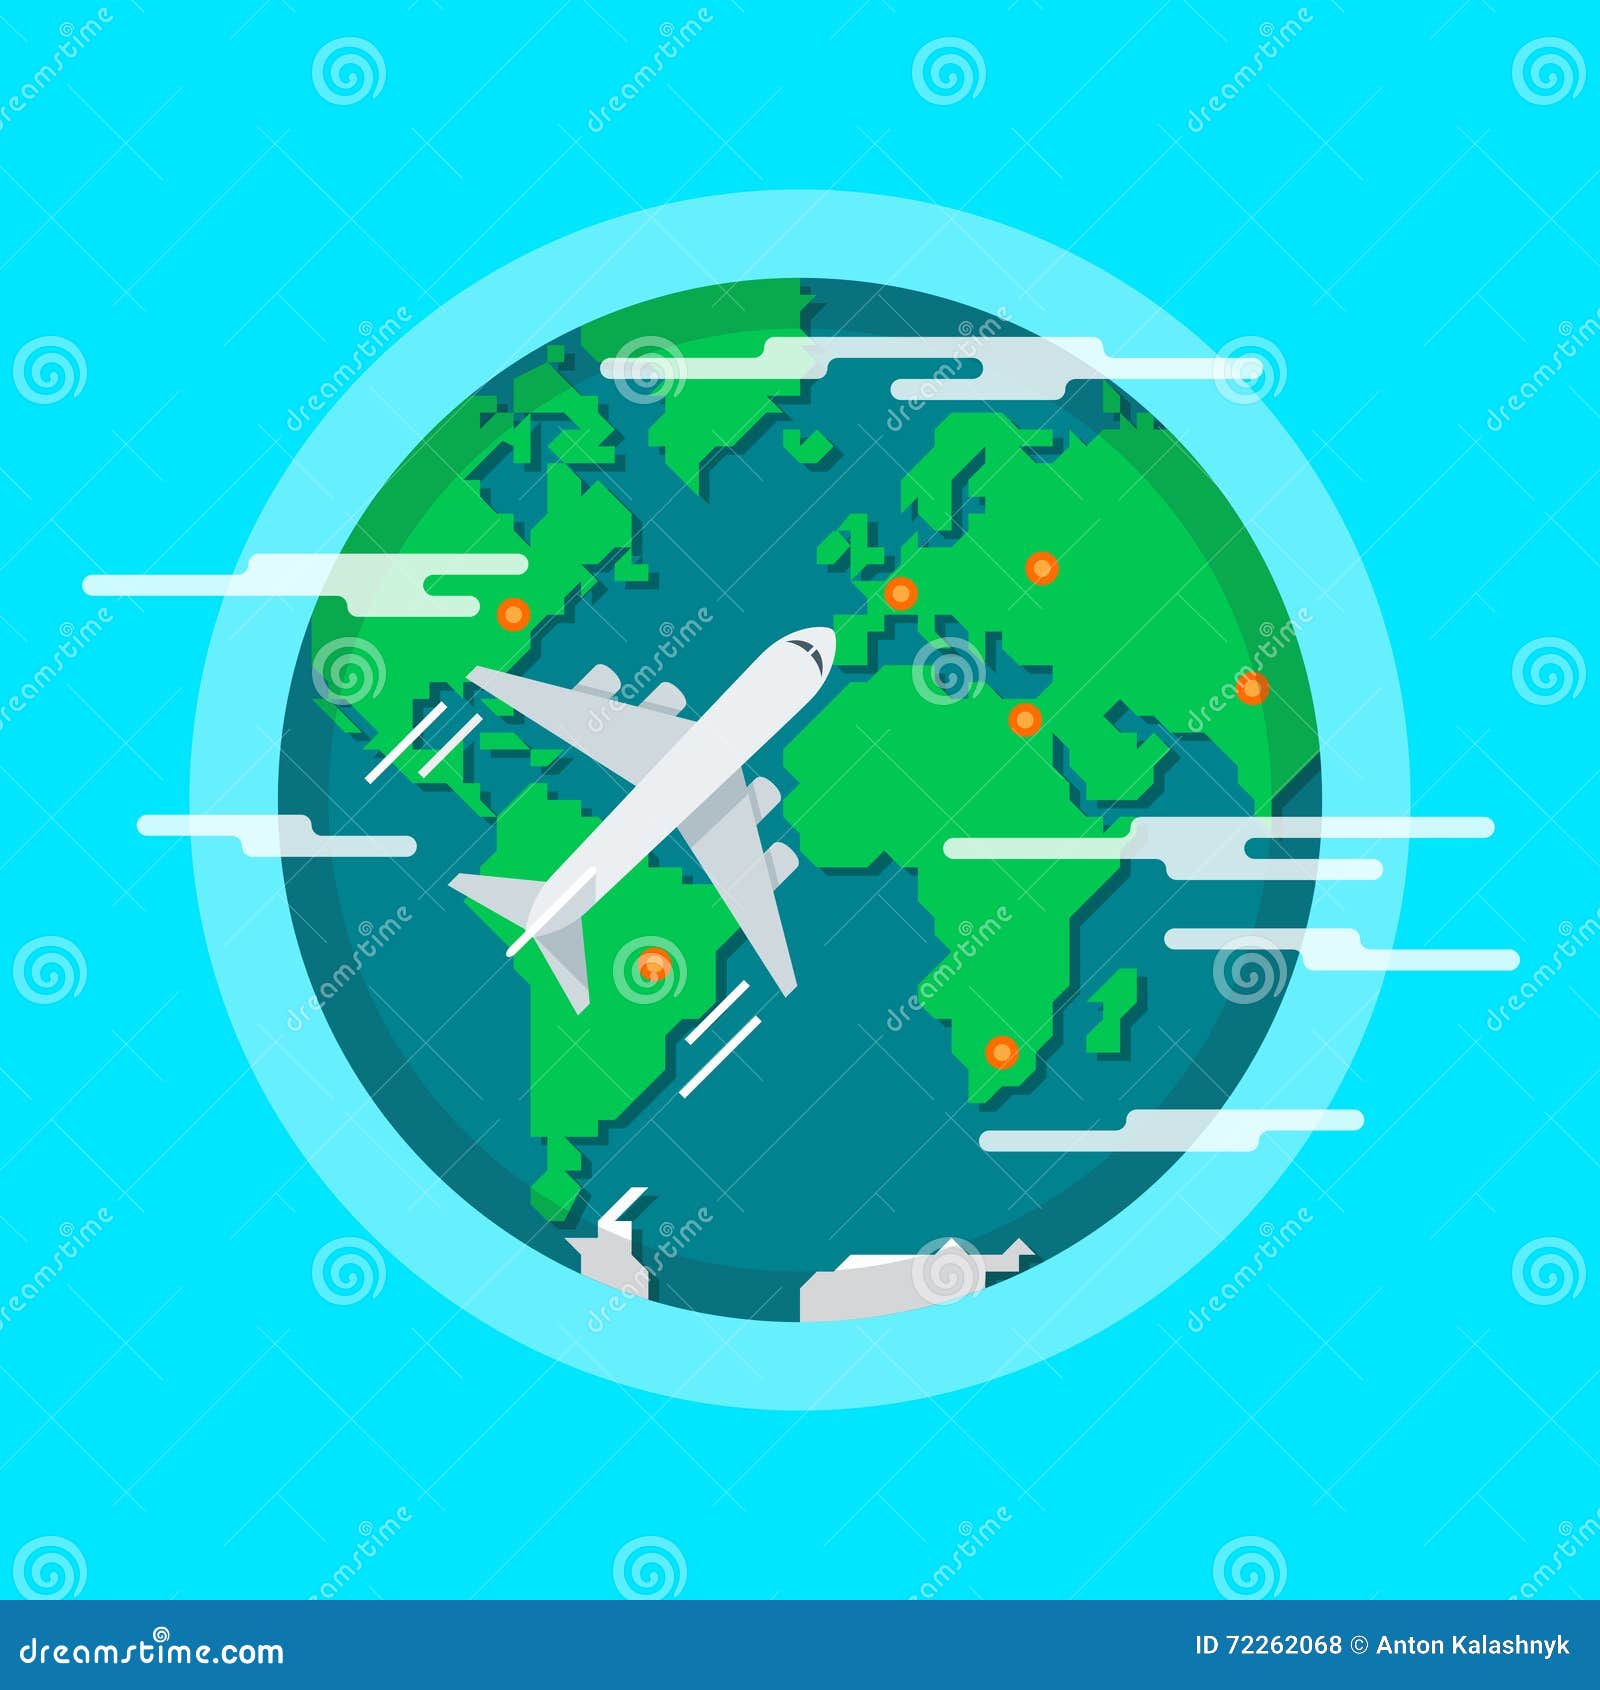 Aircraft Flying Around the World. Stock Vector - Illustration of ...